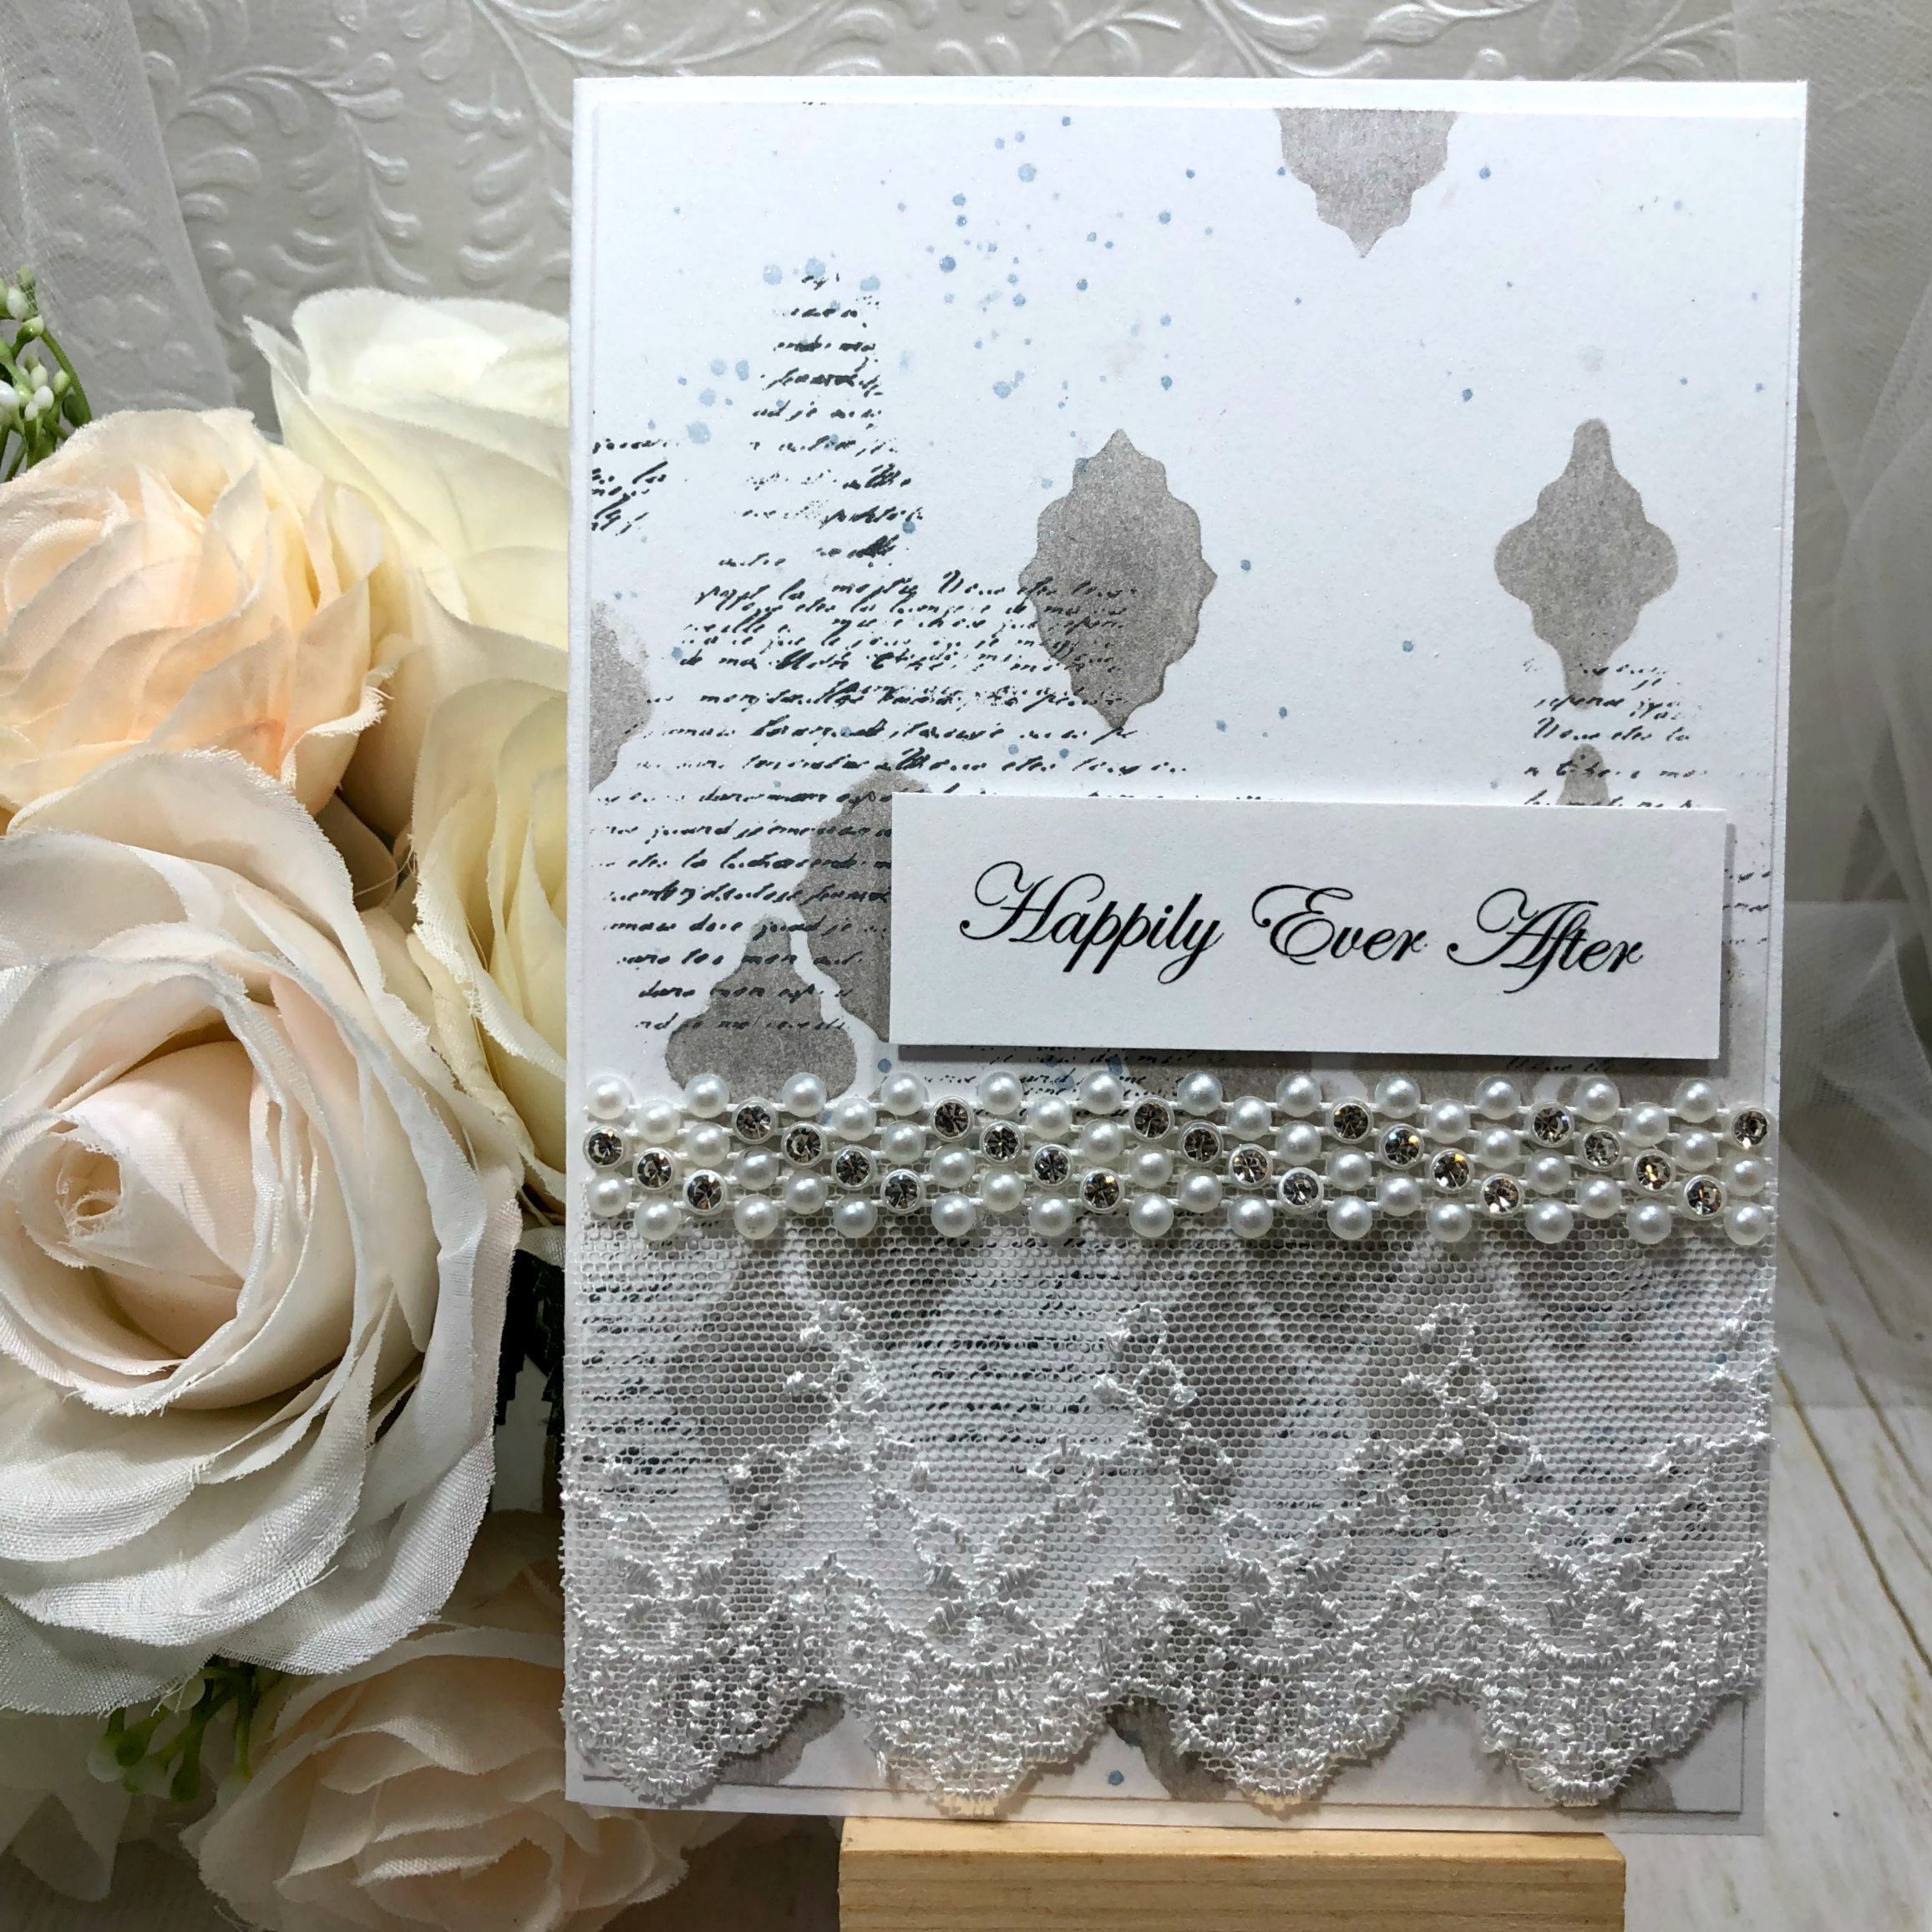 Handmade mixed media inspired wedding card with silver and white tones